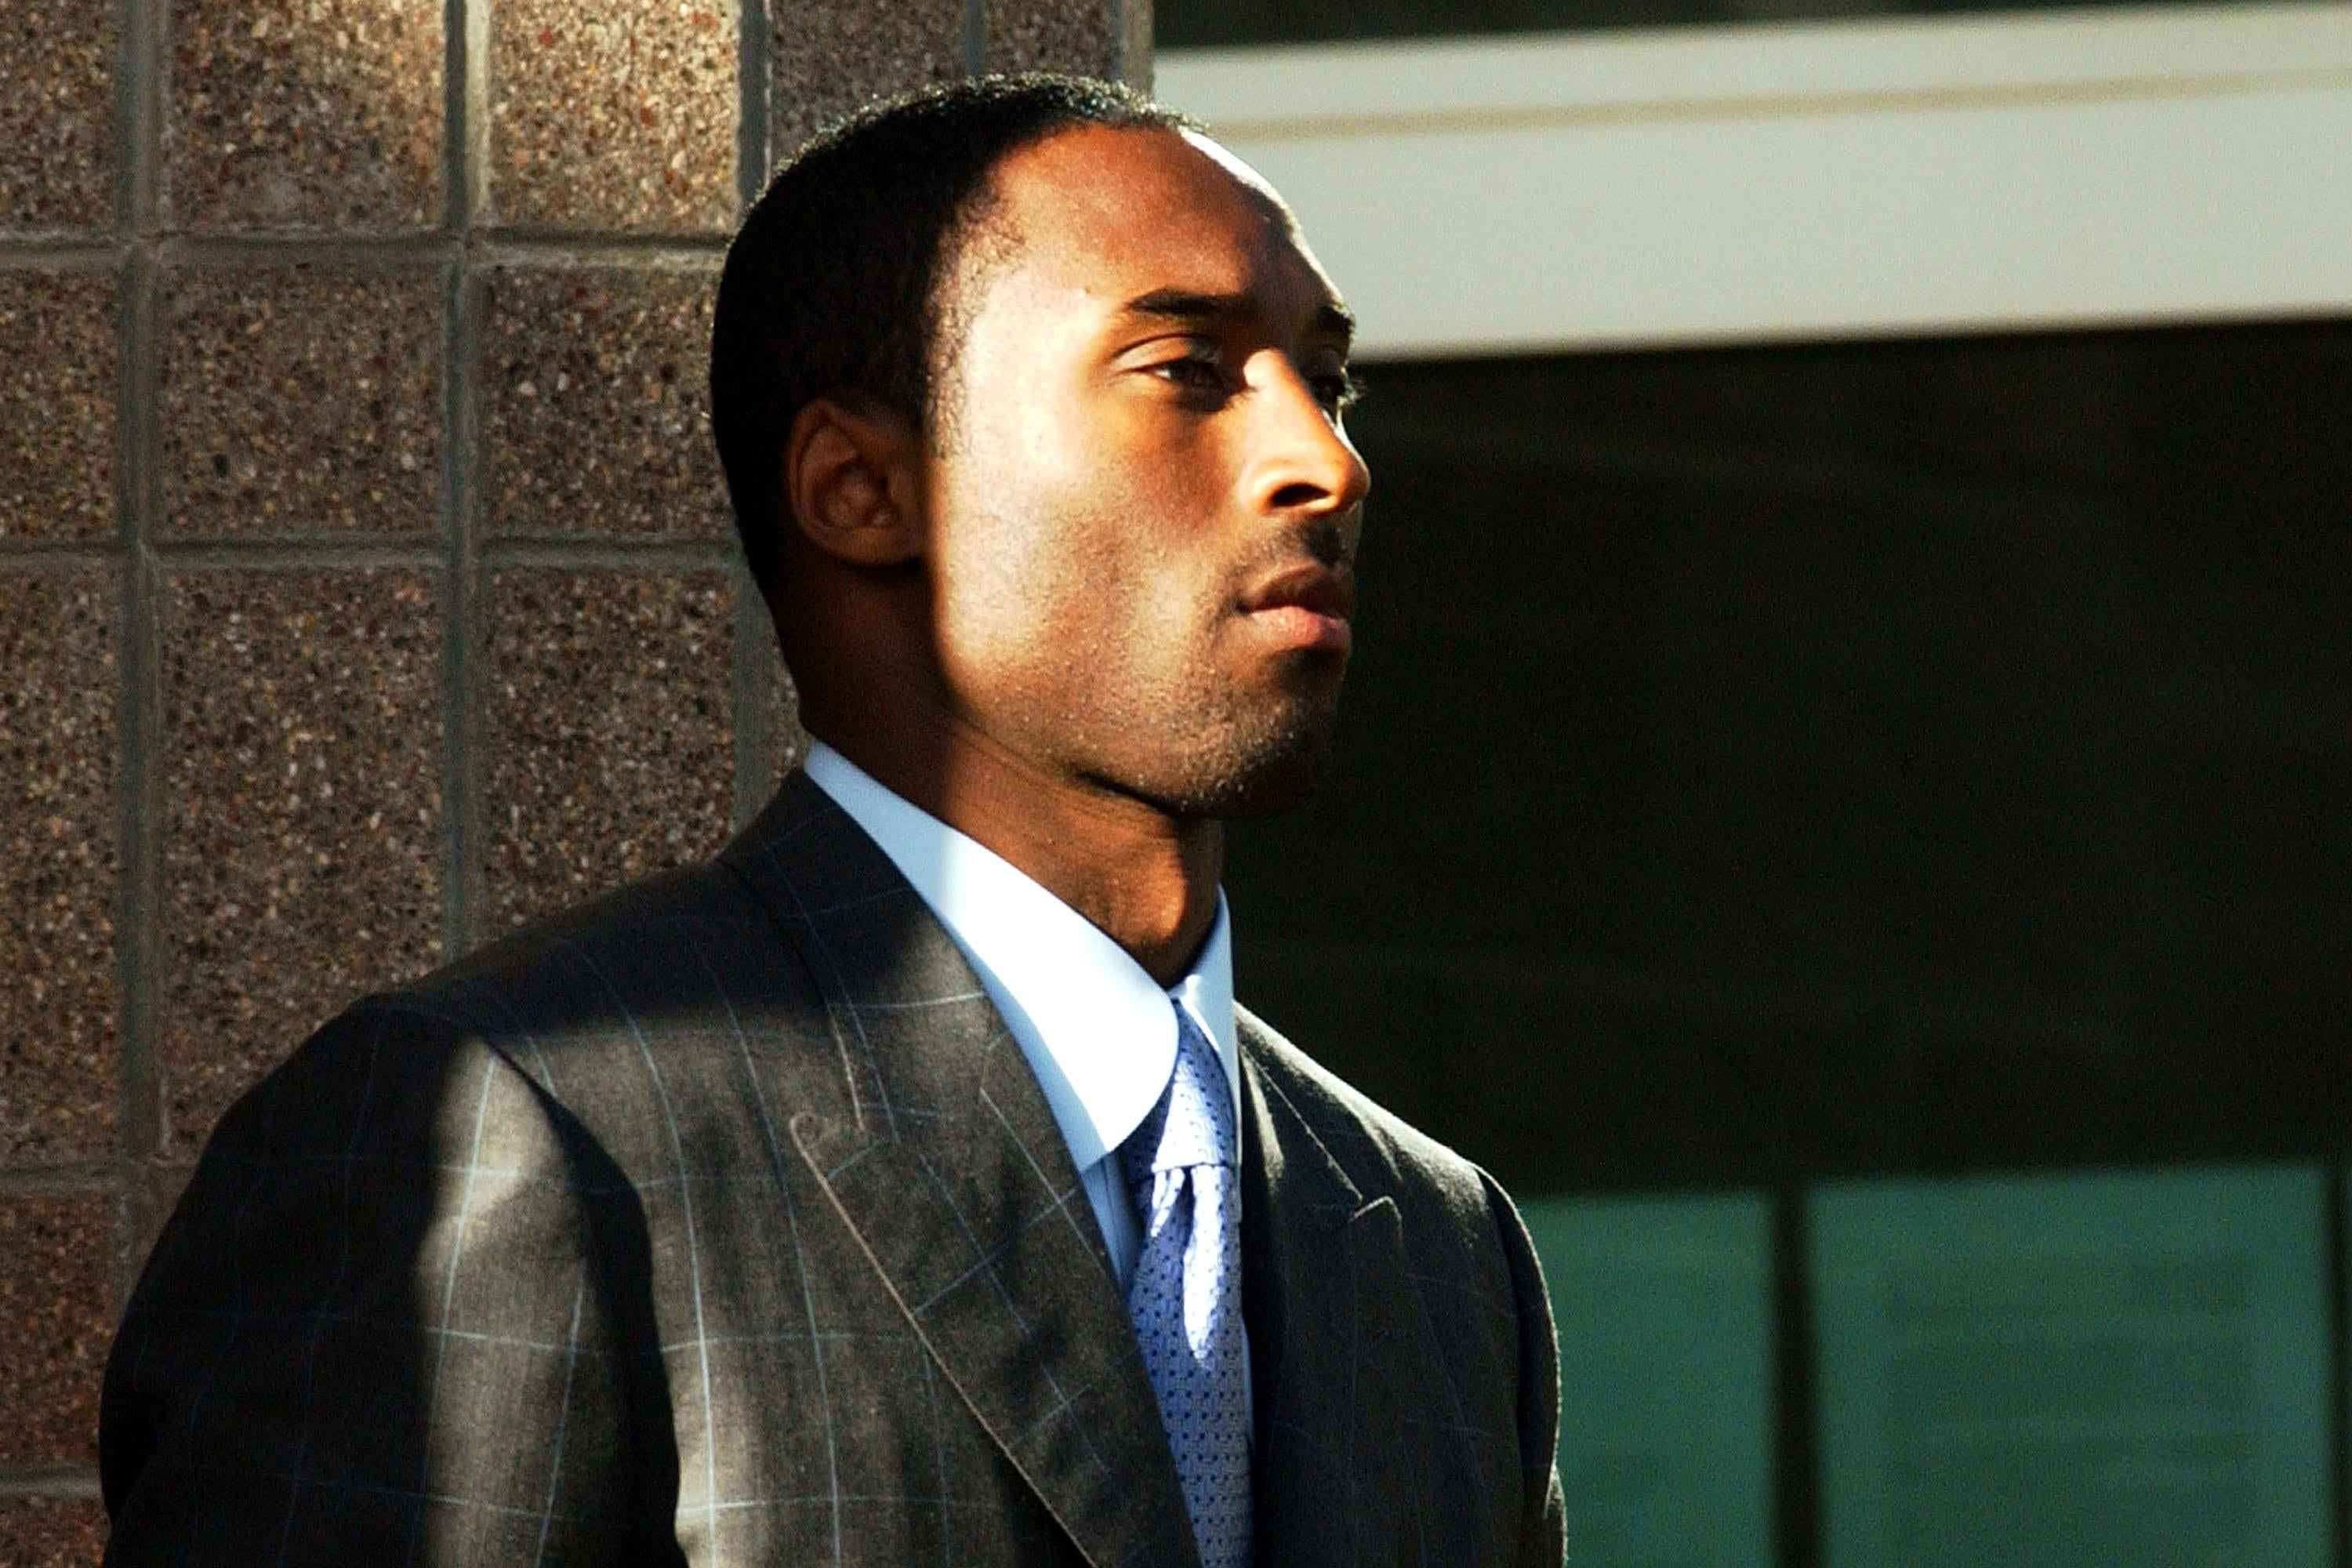 Kobe Bryant standing in a suit in the sun outside the courthouse, with a serious expression on his face.